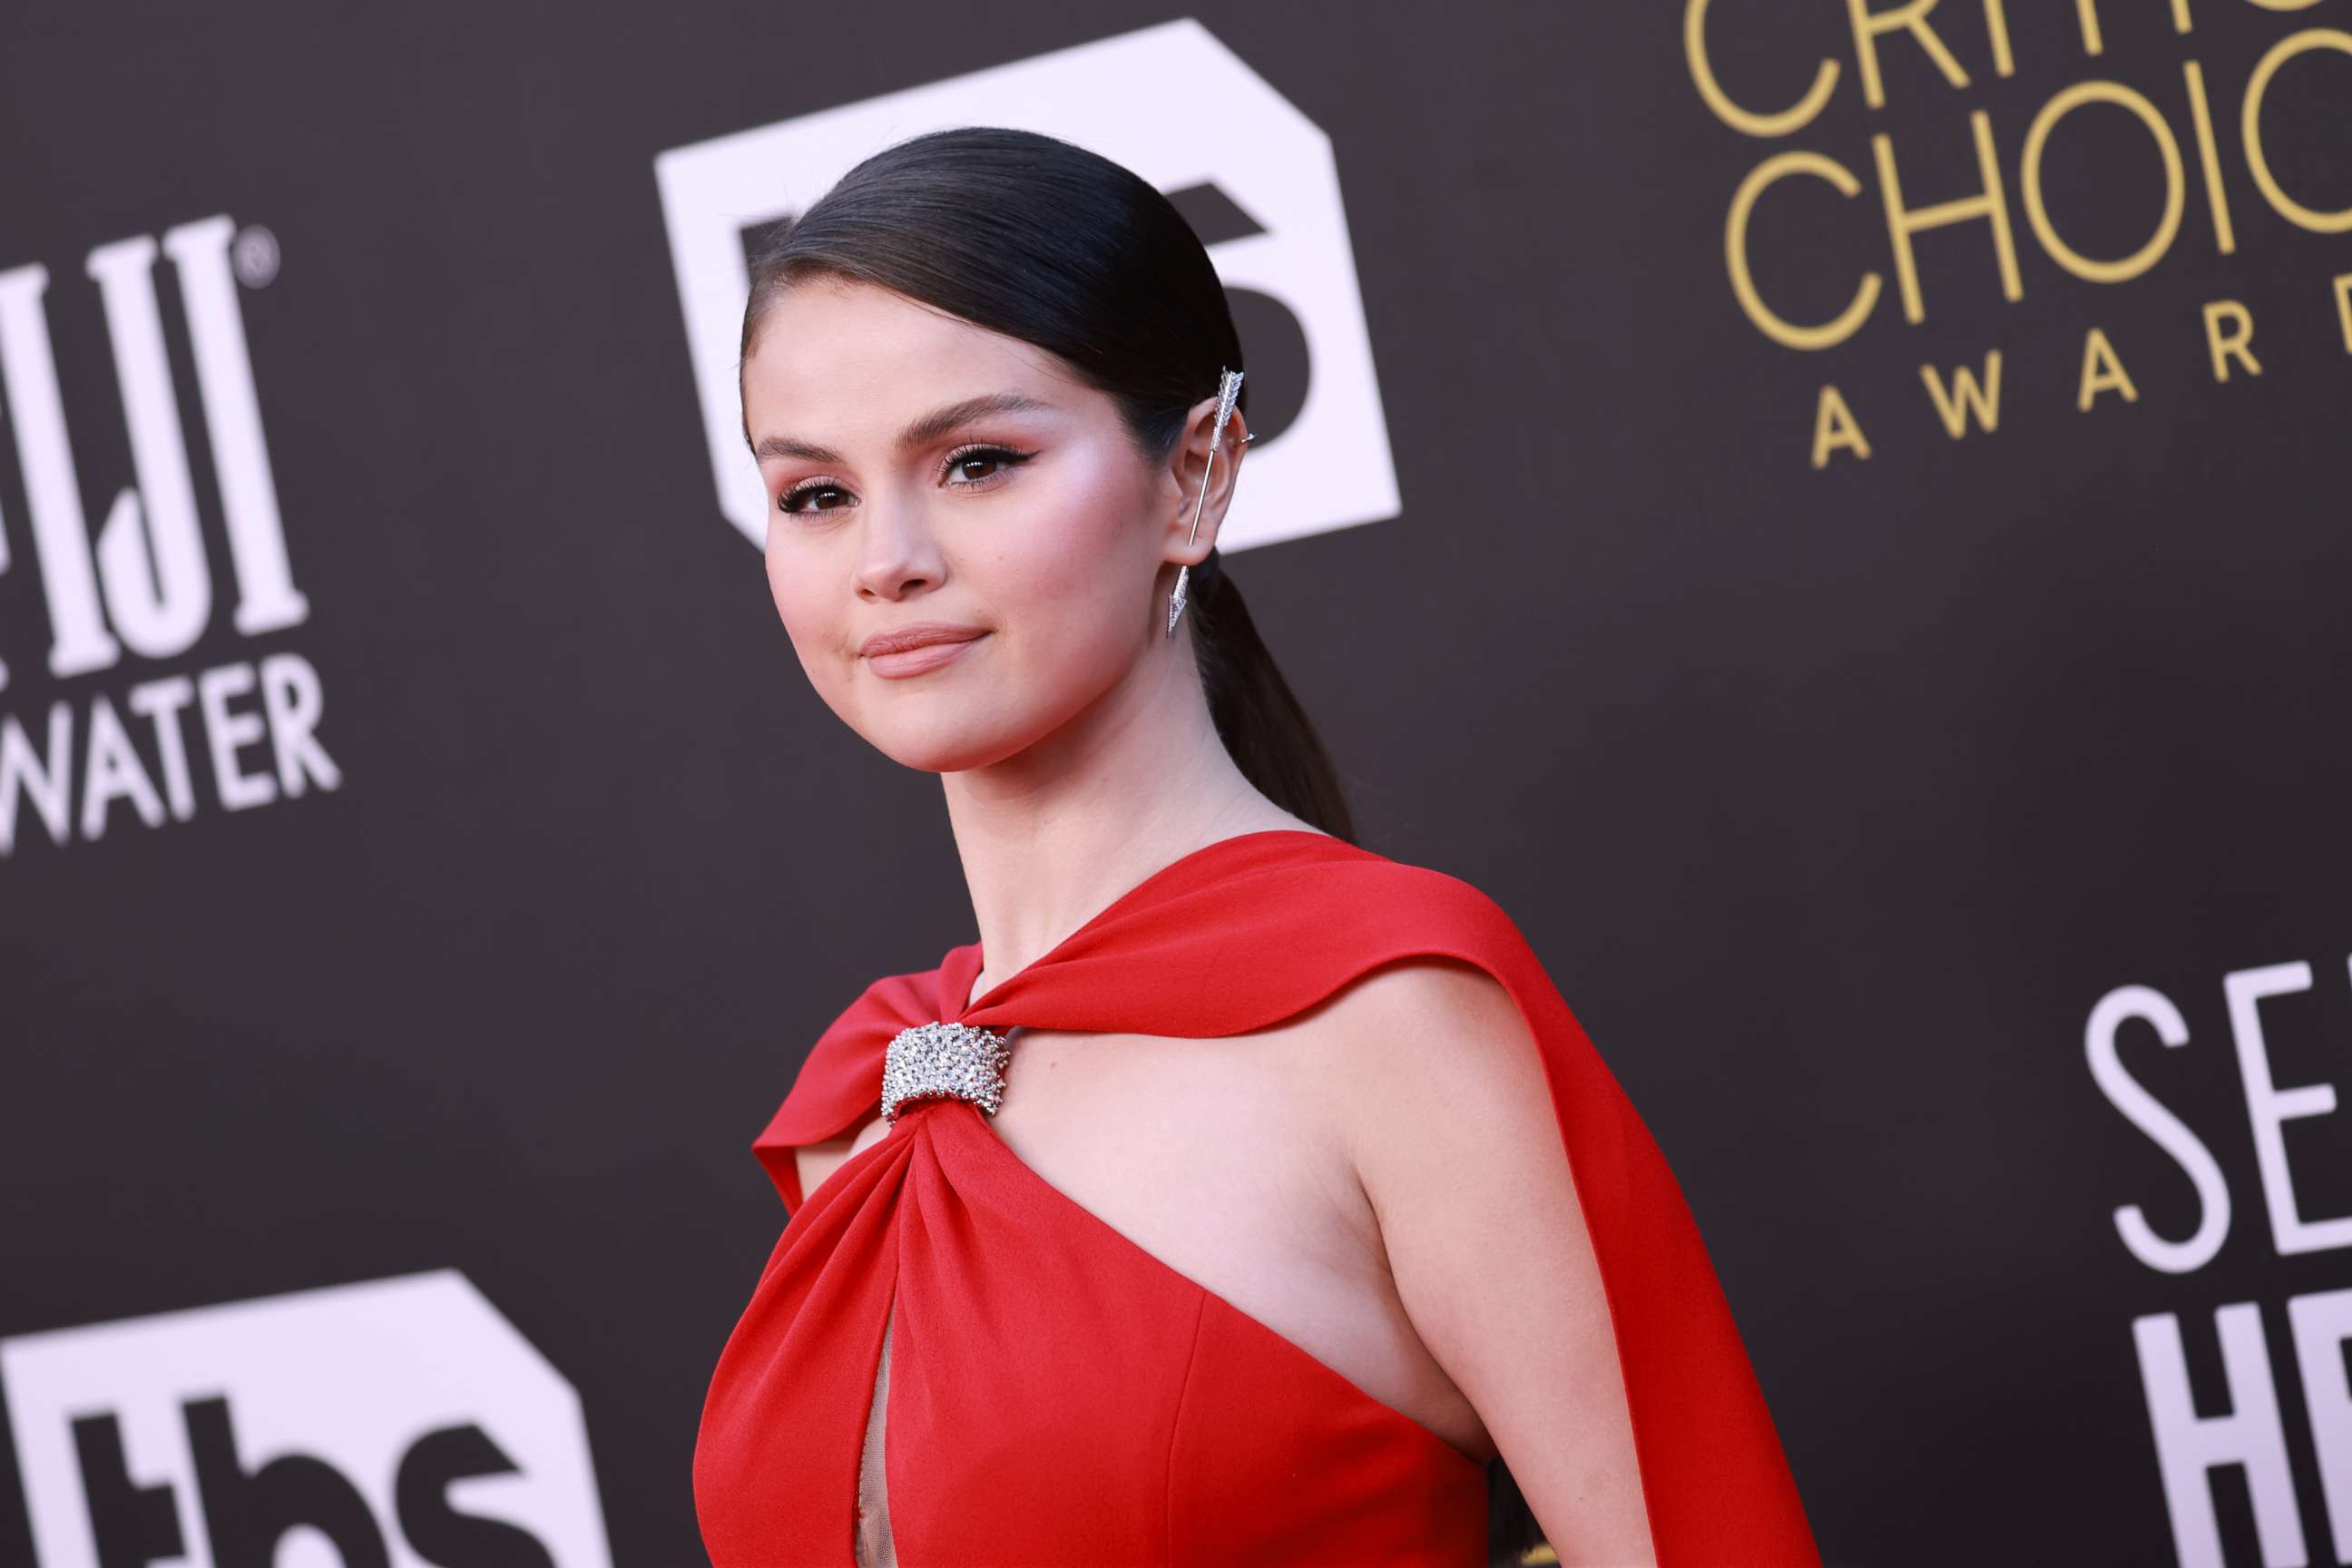 PHOTO: LOS ANGELES, CALIFORNIA - MARCH 13: Selena Gomez attends the 27th Annual Critics Choice Awards at Fairmont Century Plaza on March 13, 2022 in Los Angeles, California. (Photo by Matt Winkelmeyer/Getty Images)